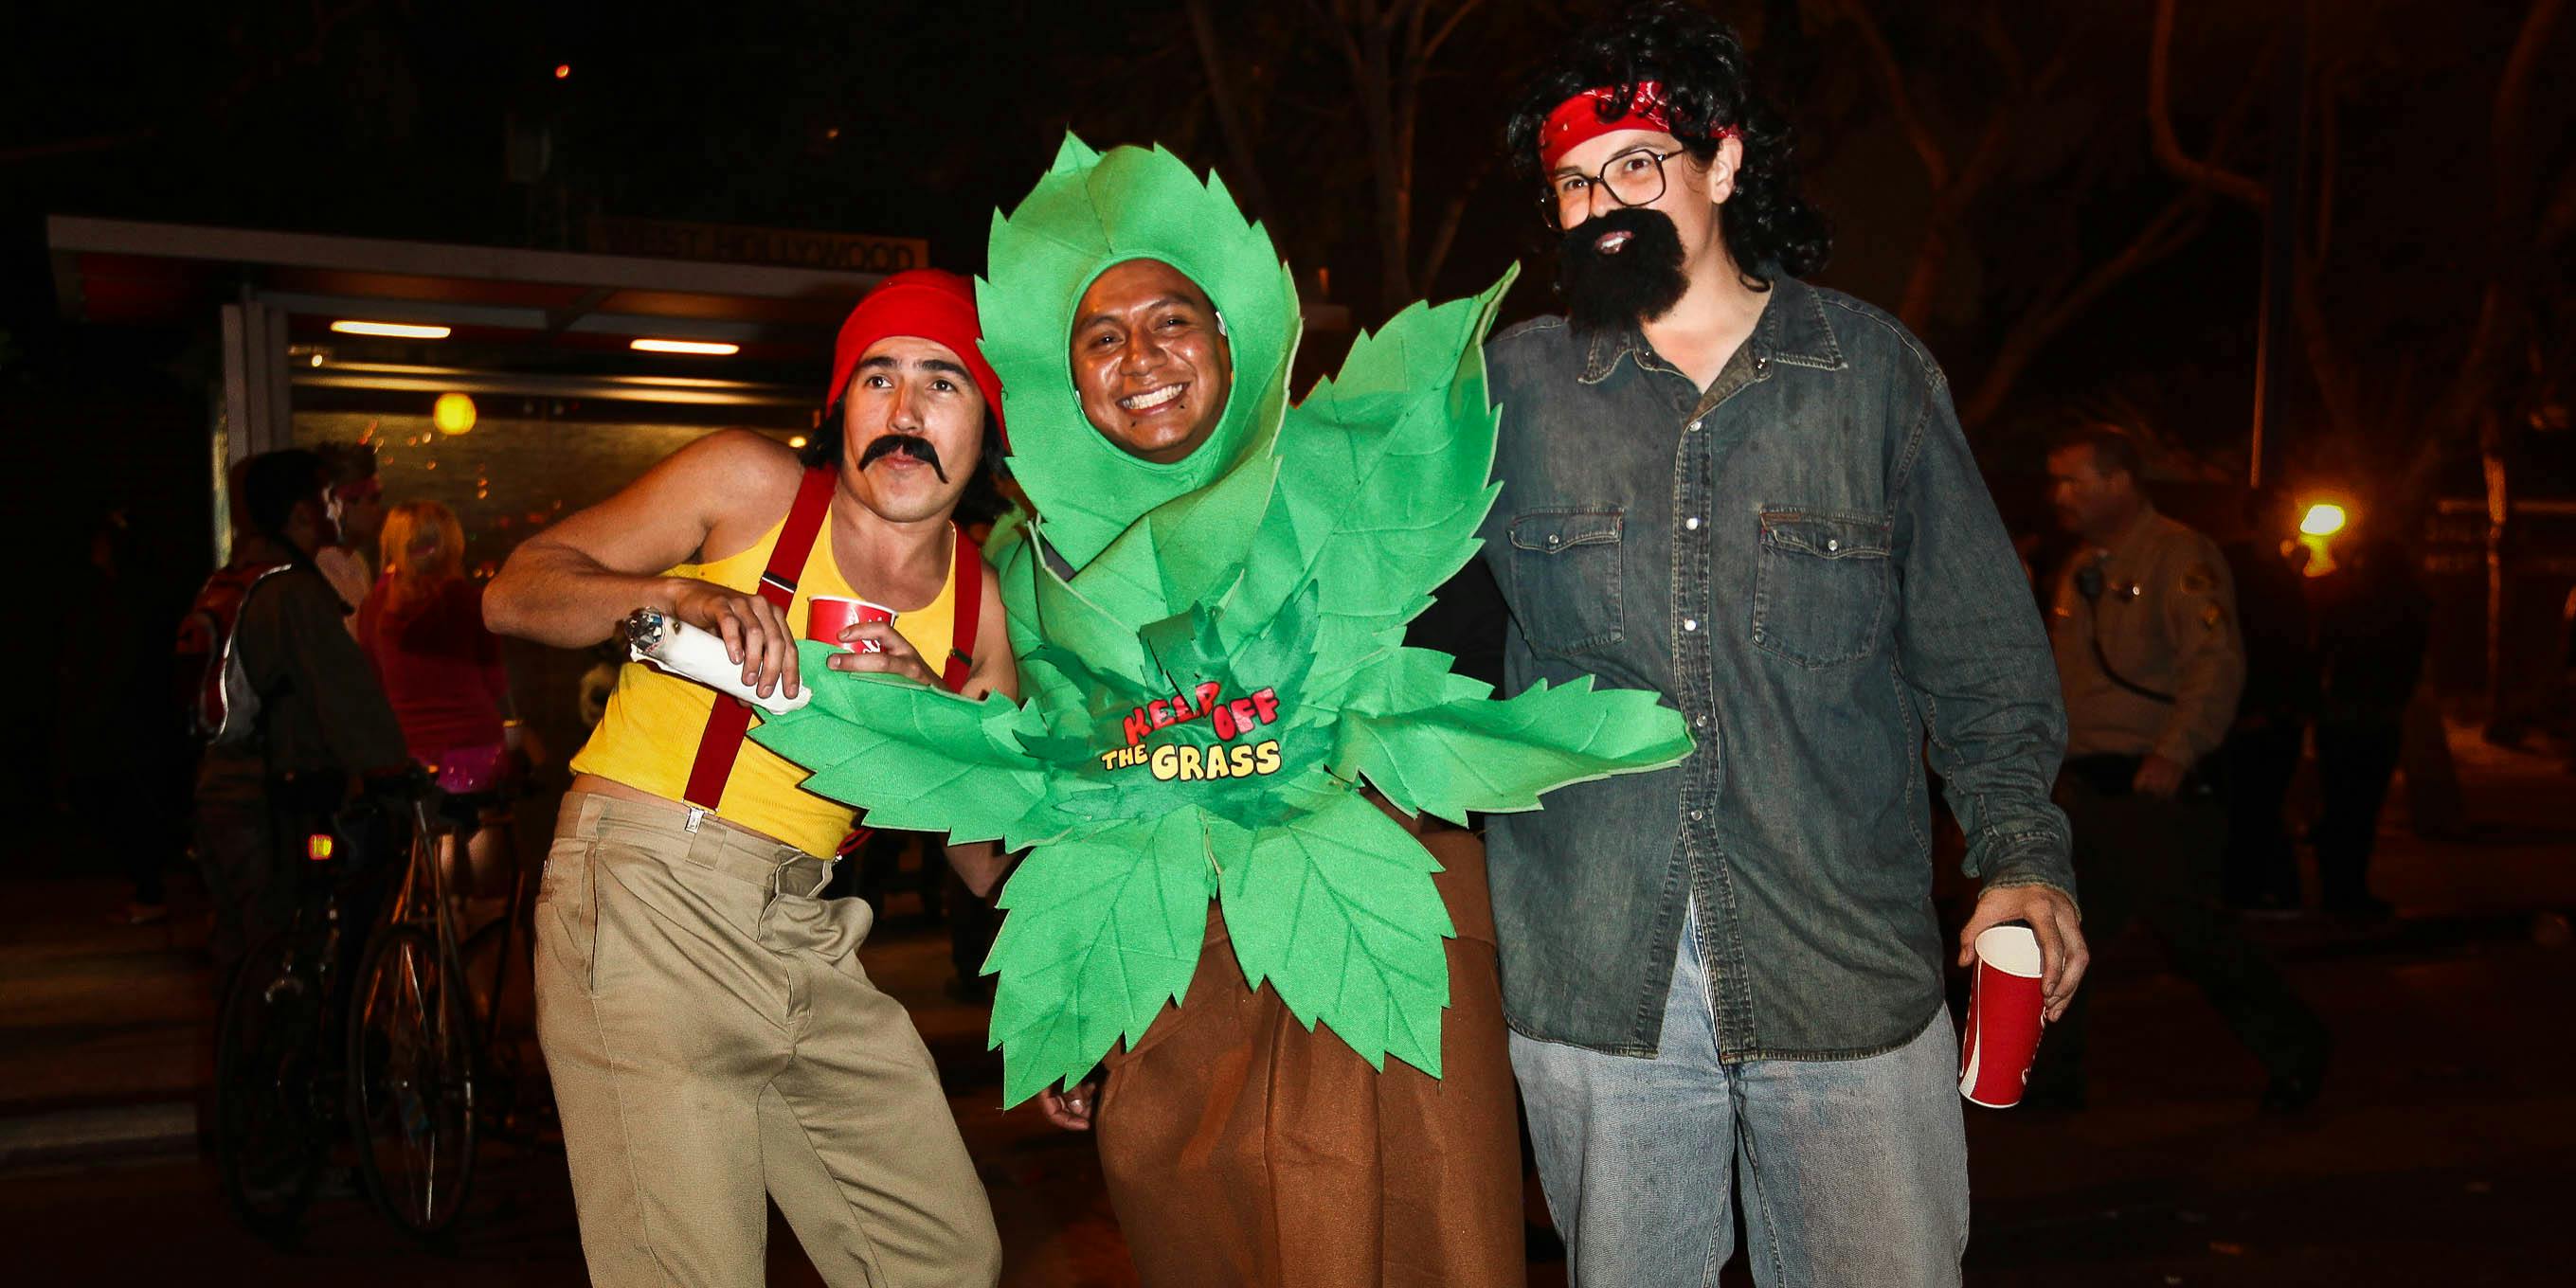 20 Easy and Hilarious Weed Halloween Costume Ideas